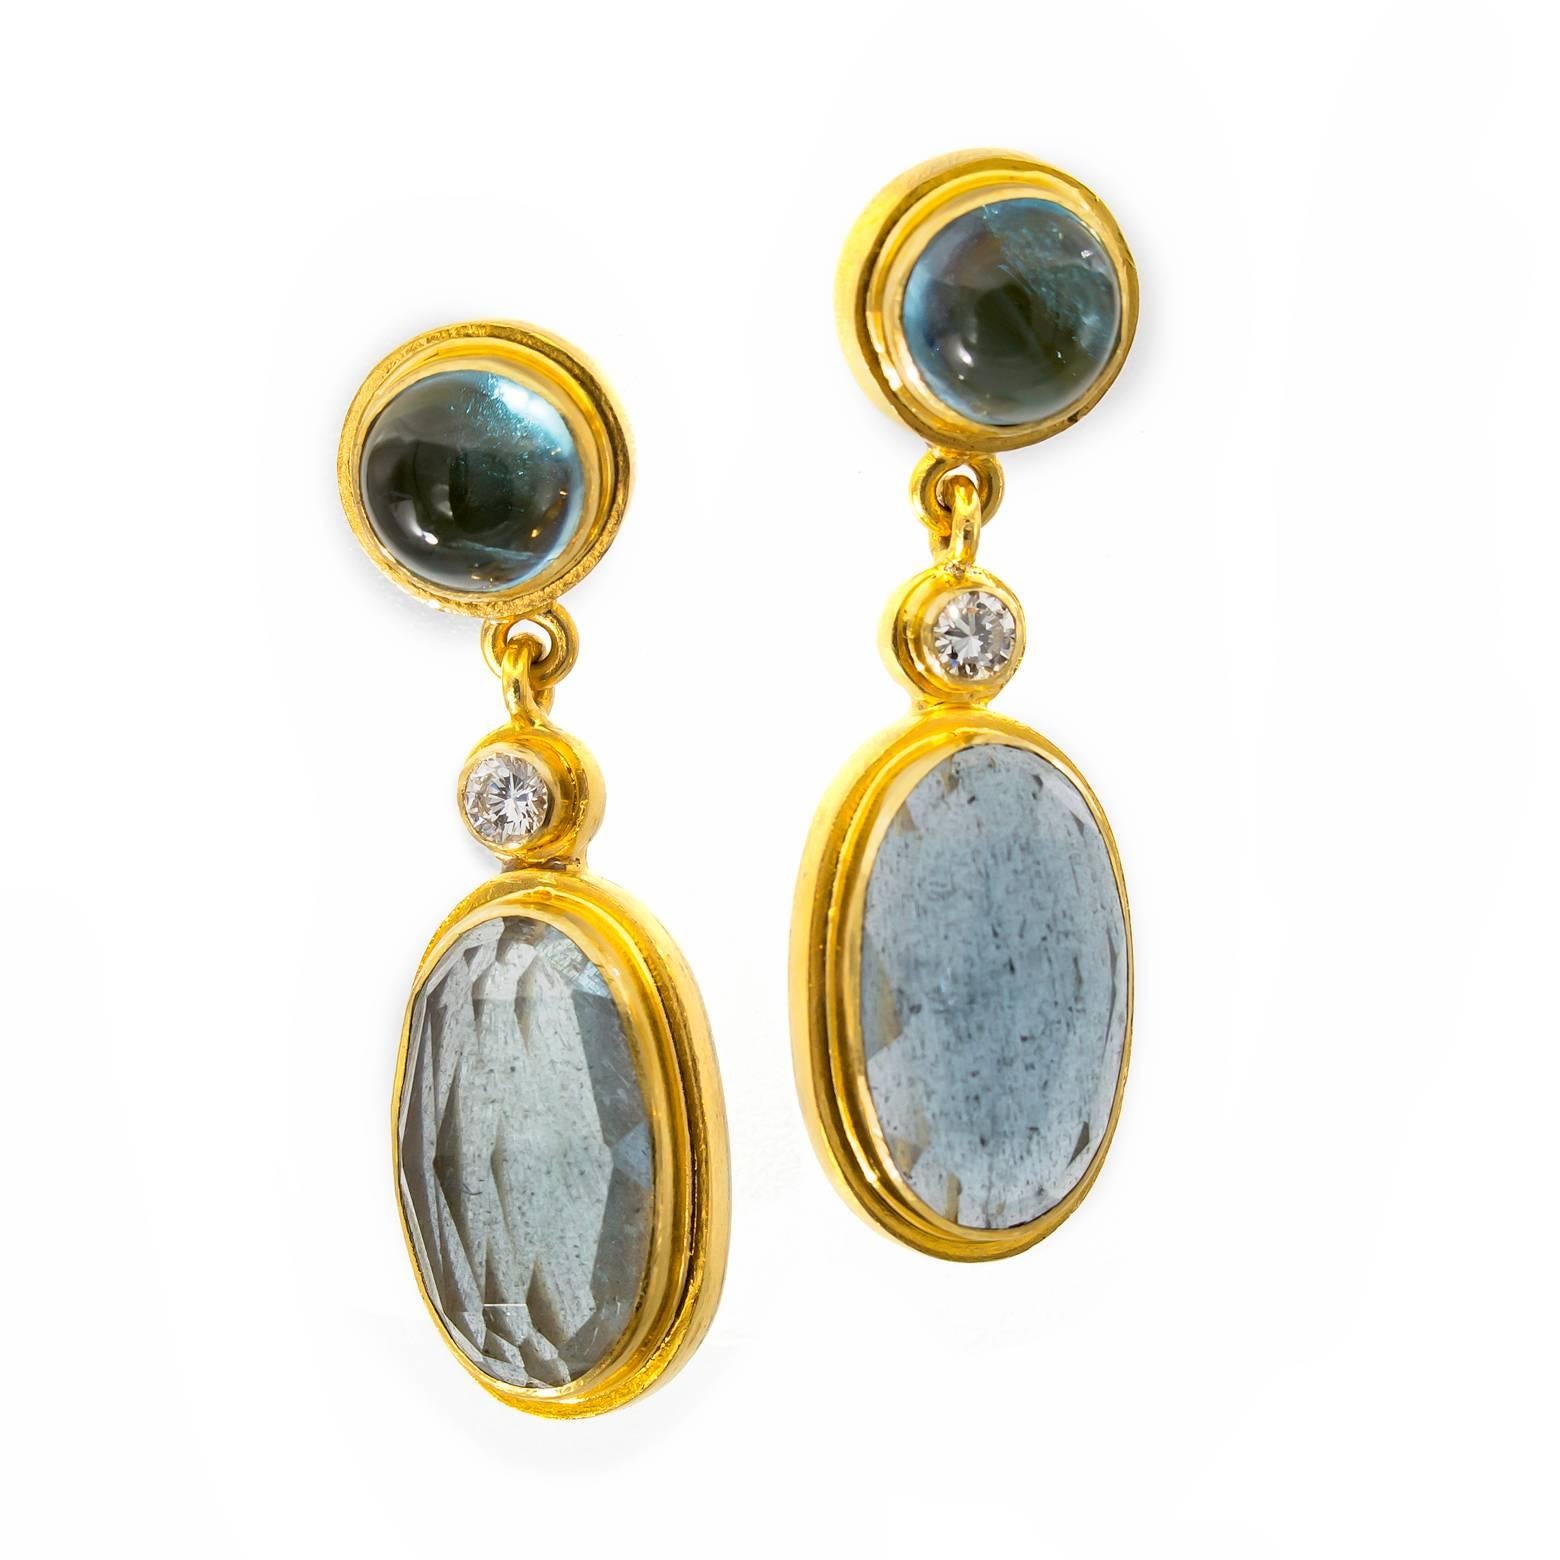 Contemporary Moss Aquamarine and Blue Tourmaline Drop Earrings in Yellow Gold with Diamonds